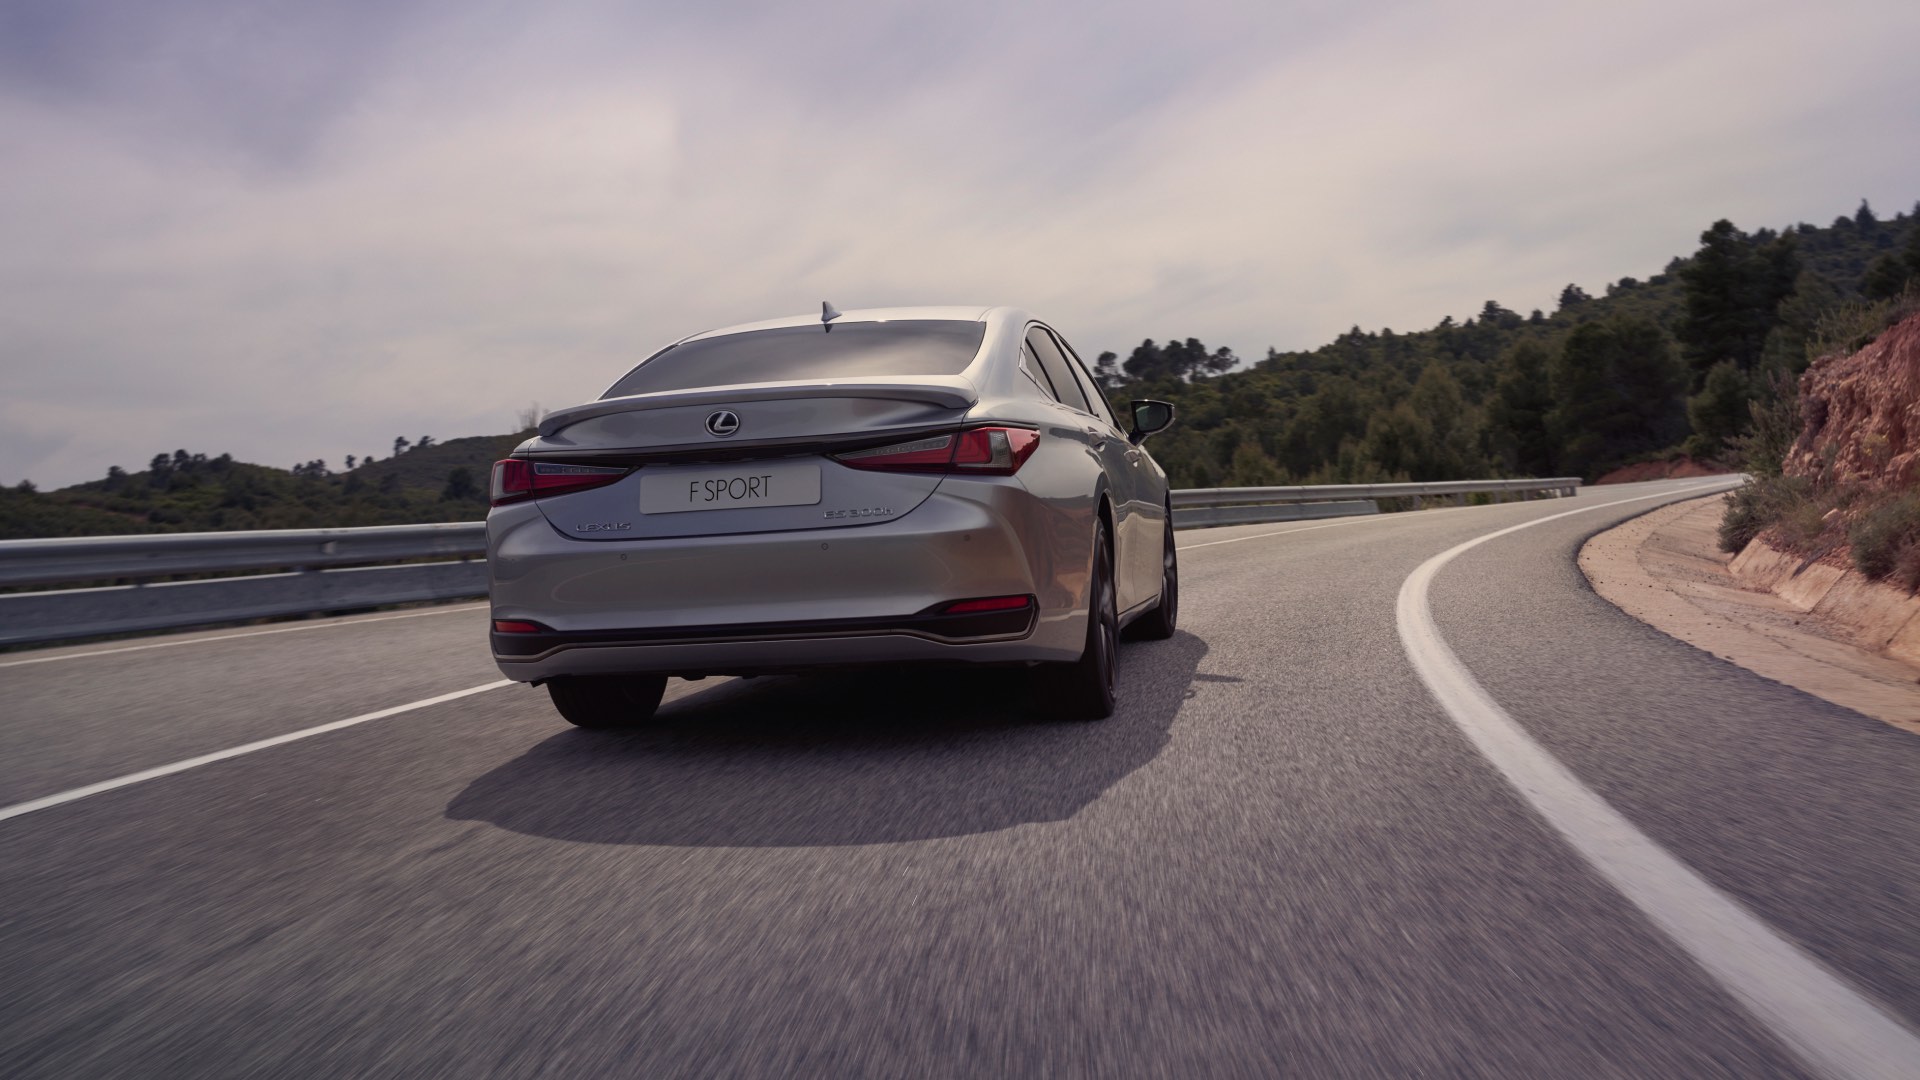 The rear view of a silver Lexus ES F Sport as it speeds along a highway.